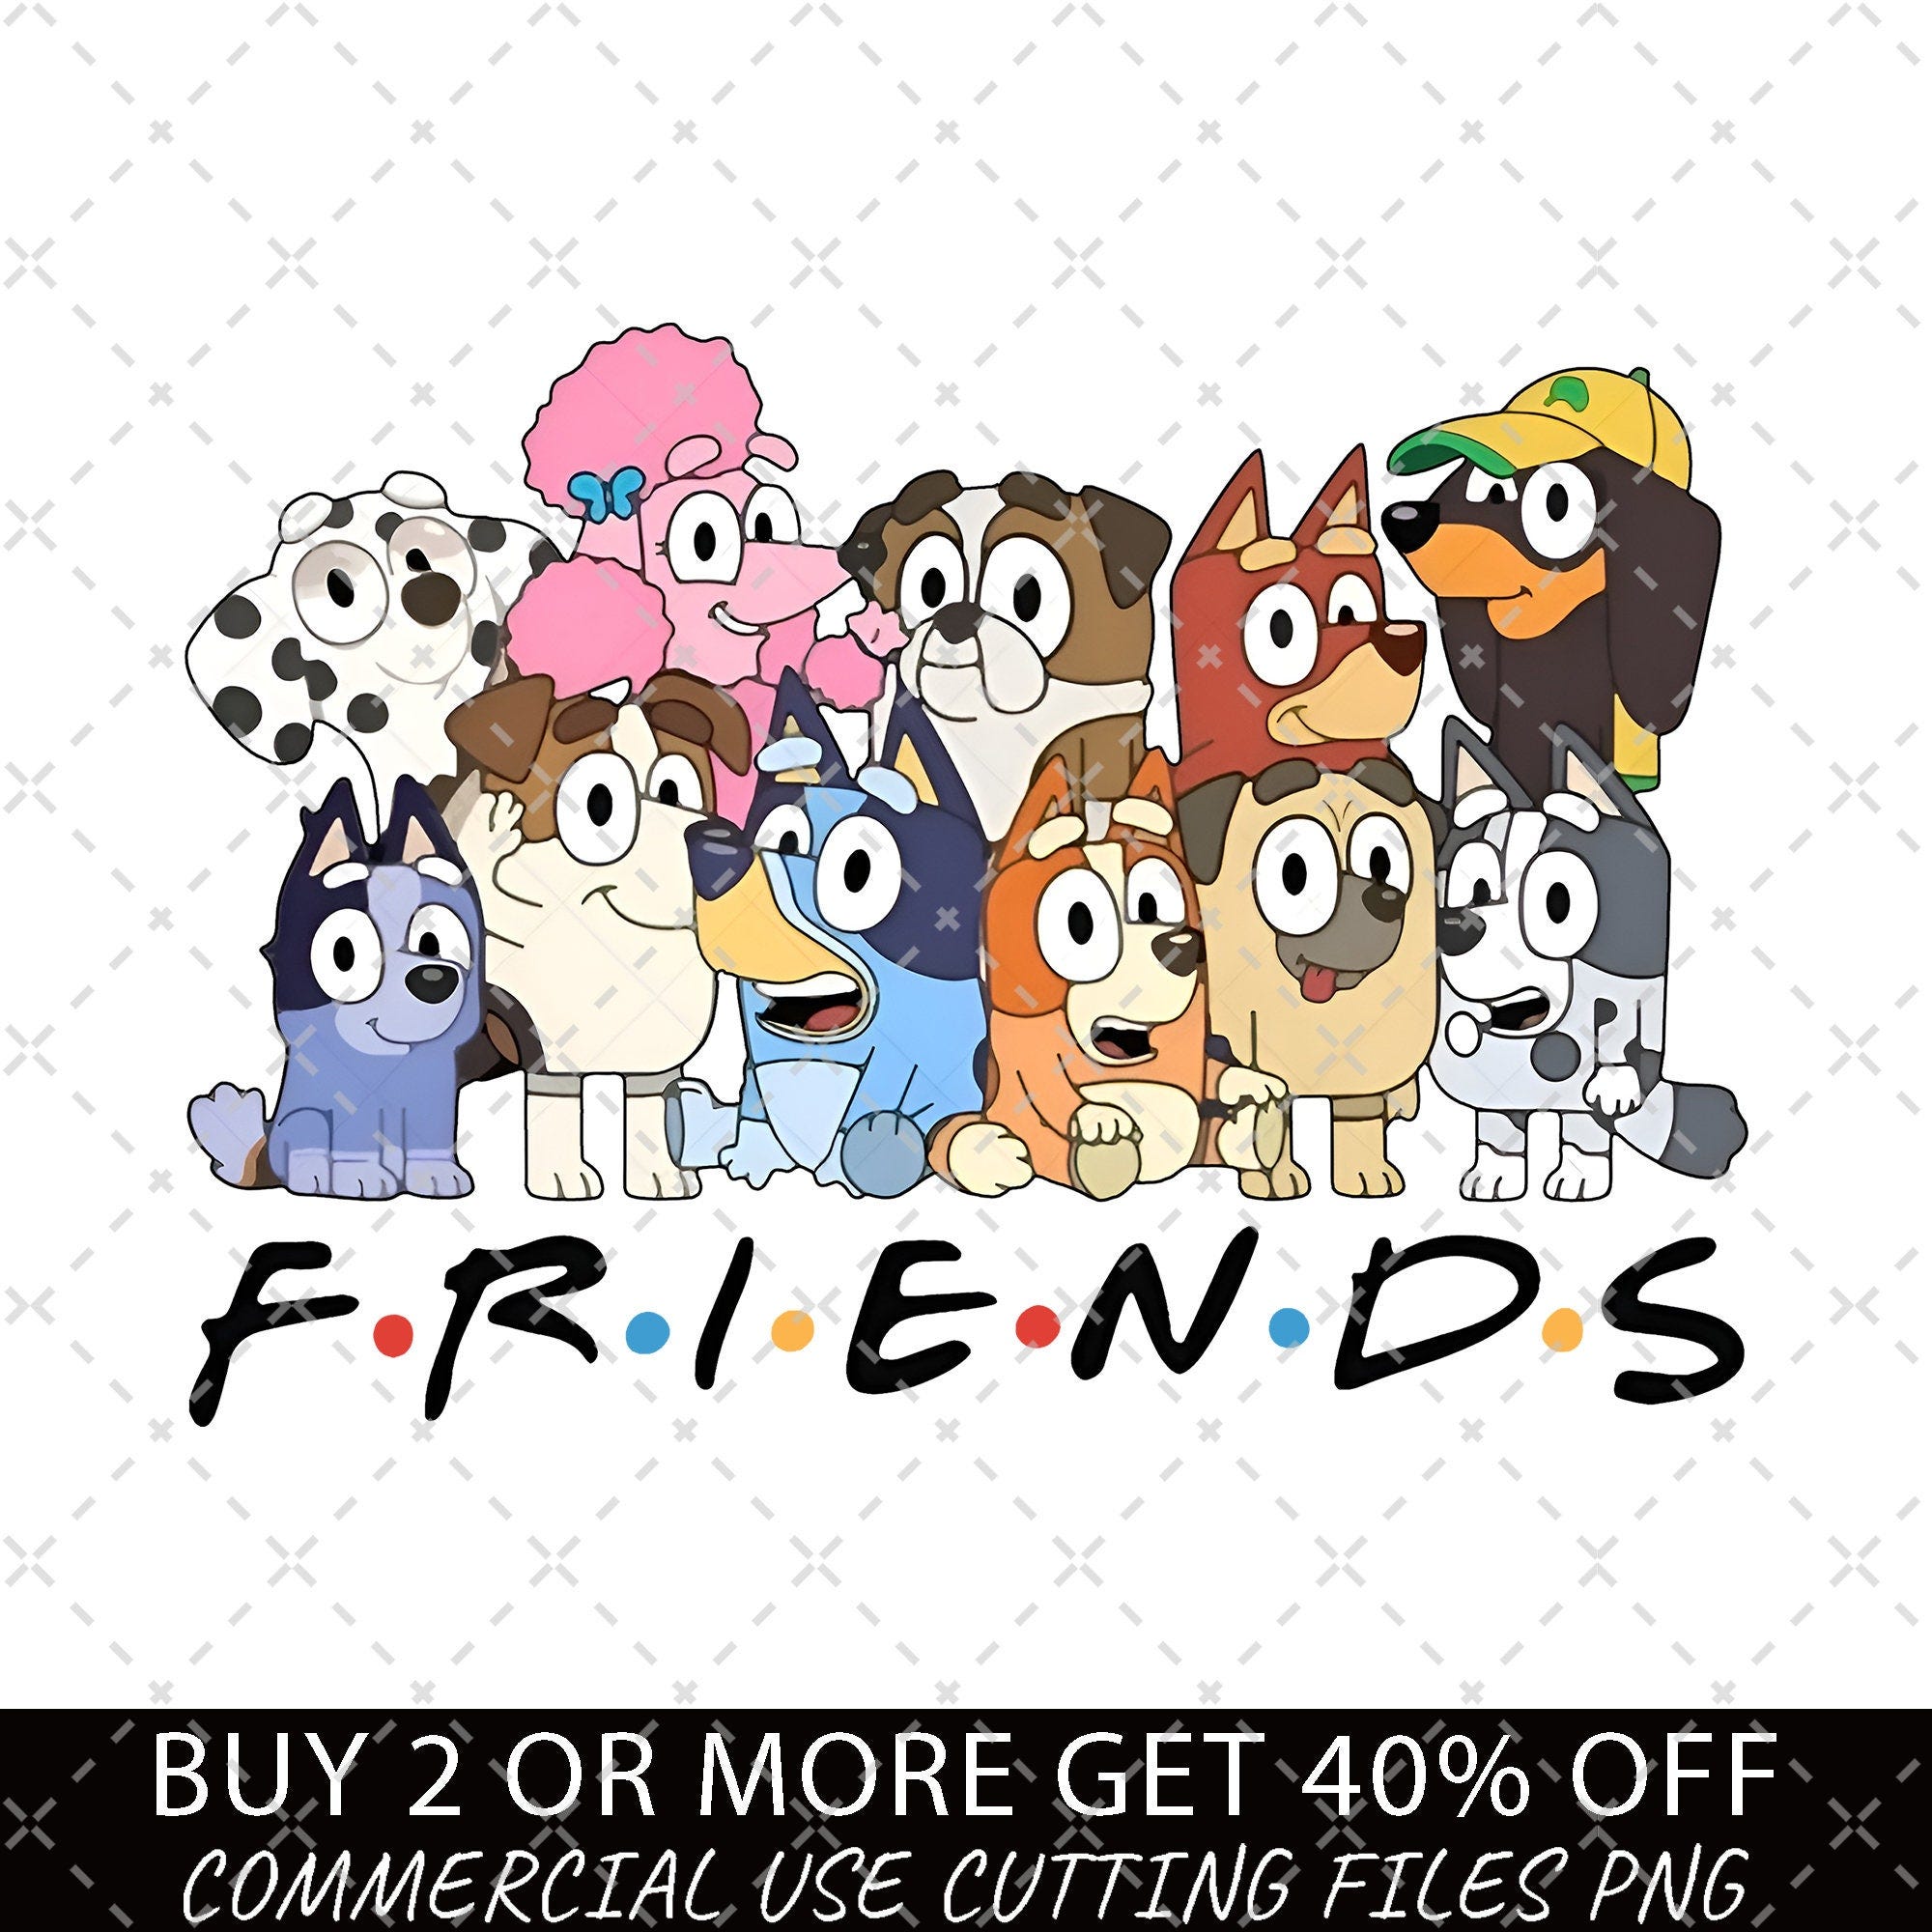 Bluey Friends PNG, Bluey Family PNG, Bluey Png, Bluey Bingo Png, Bluey Mom Png, Bluey Dad Pn, Bluey Friends Png, Bluey PNG